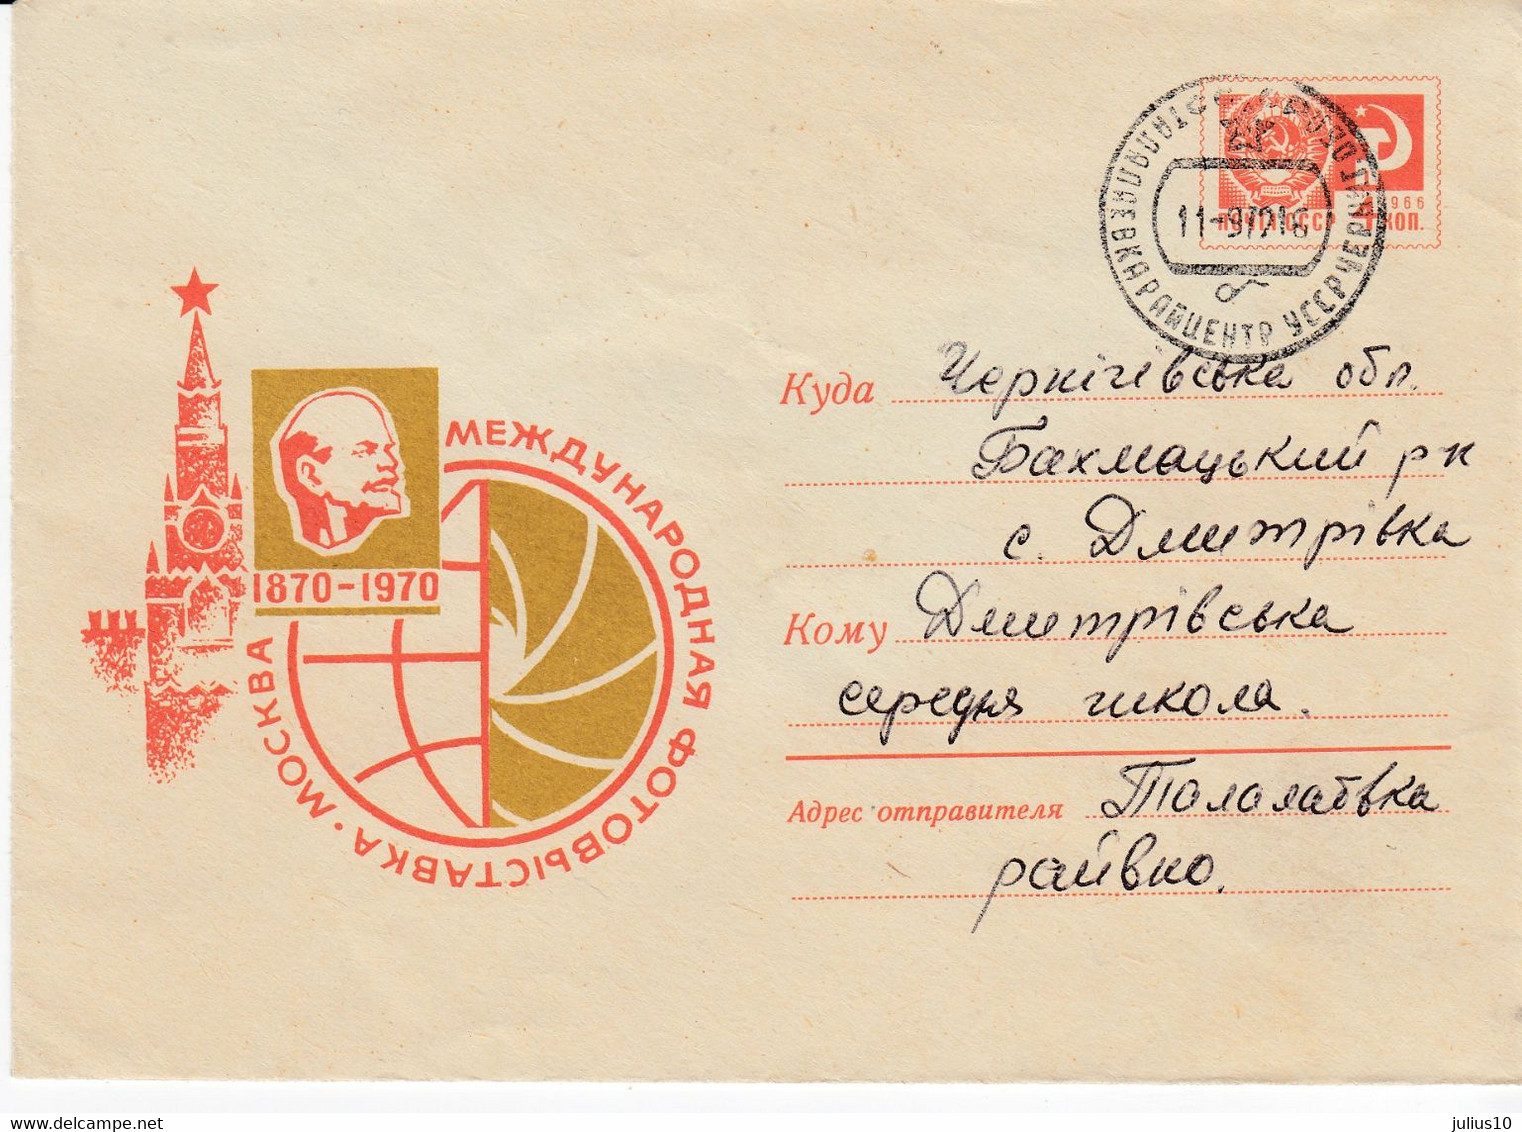 RUSSIA COVER STATIONERY USED 1969 Lenin Kremlin Photo Exhibition 29377 - 1960-69